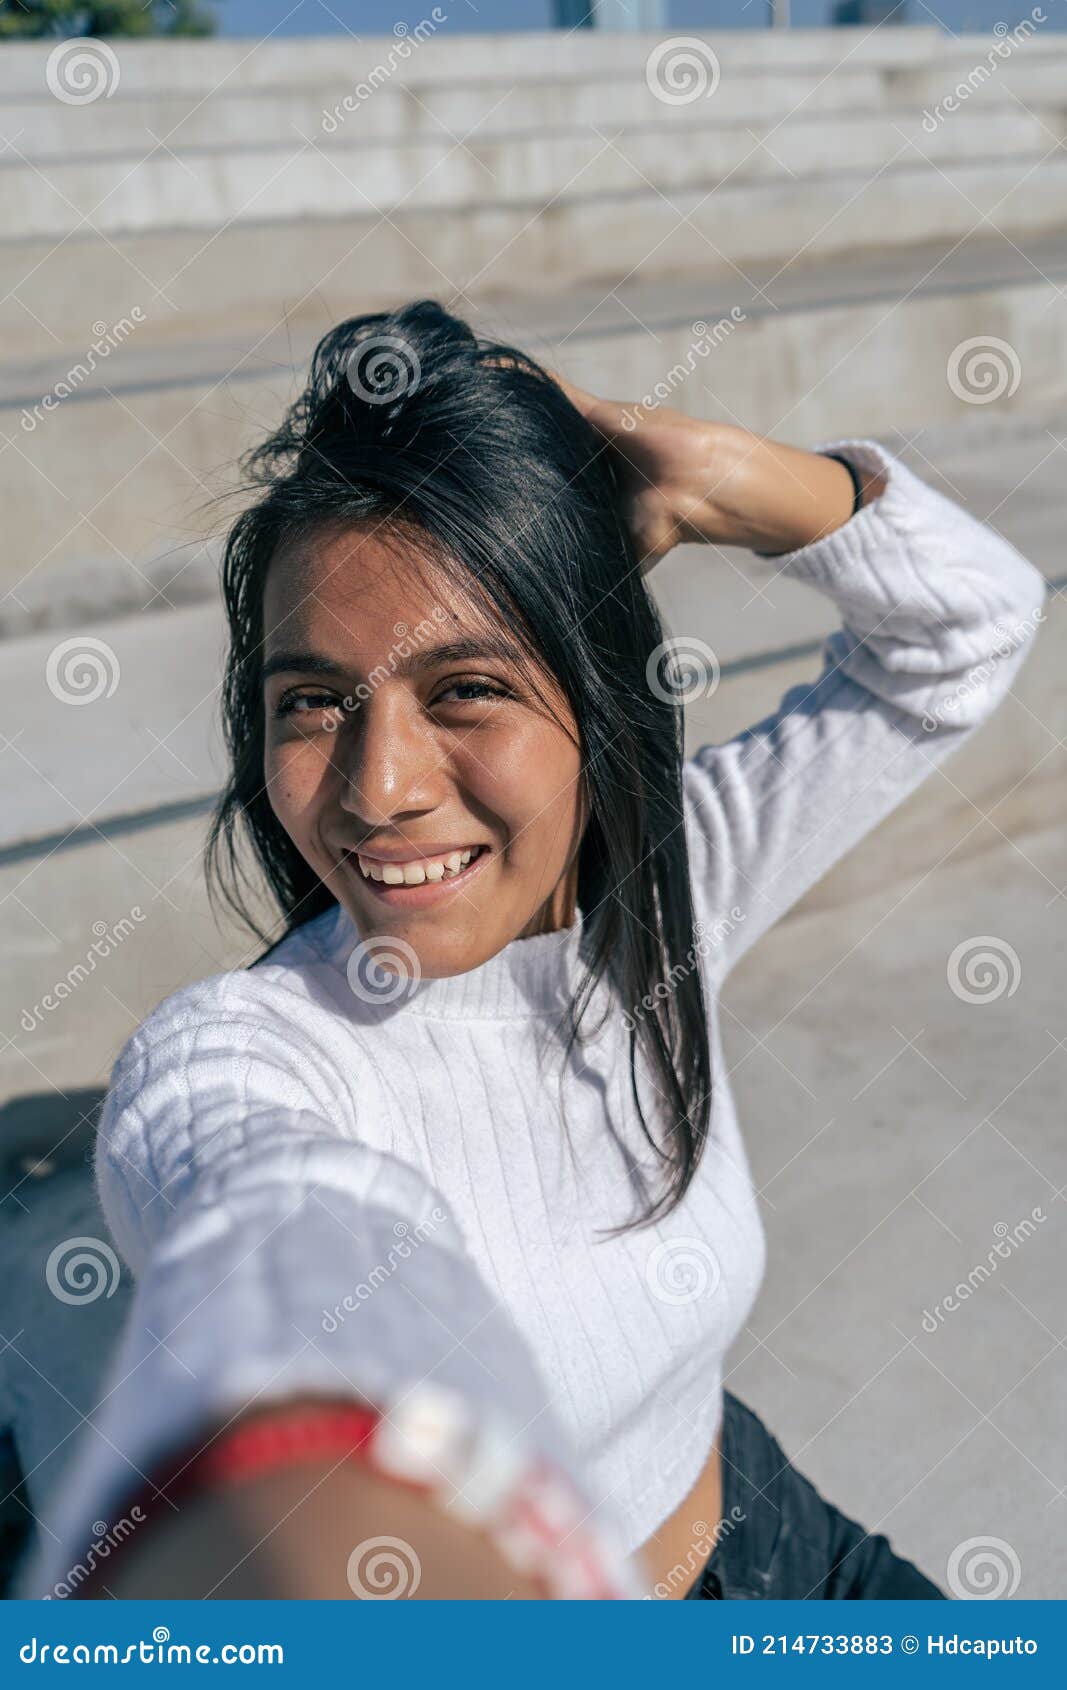 Cheerfull Young Latin Woman Taking A Selfie Or Photograph With Her Smartphone Stock Image 